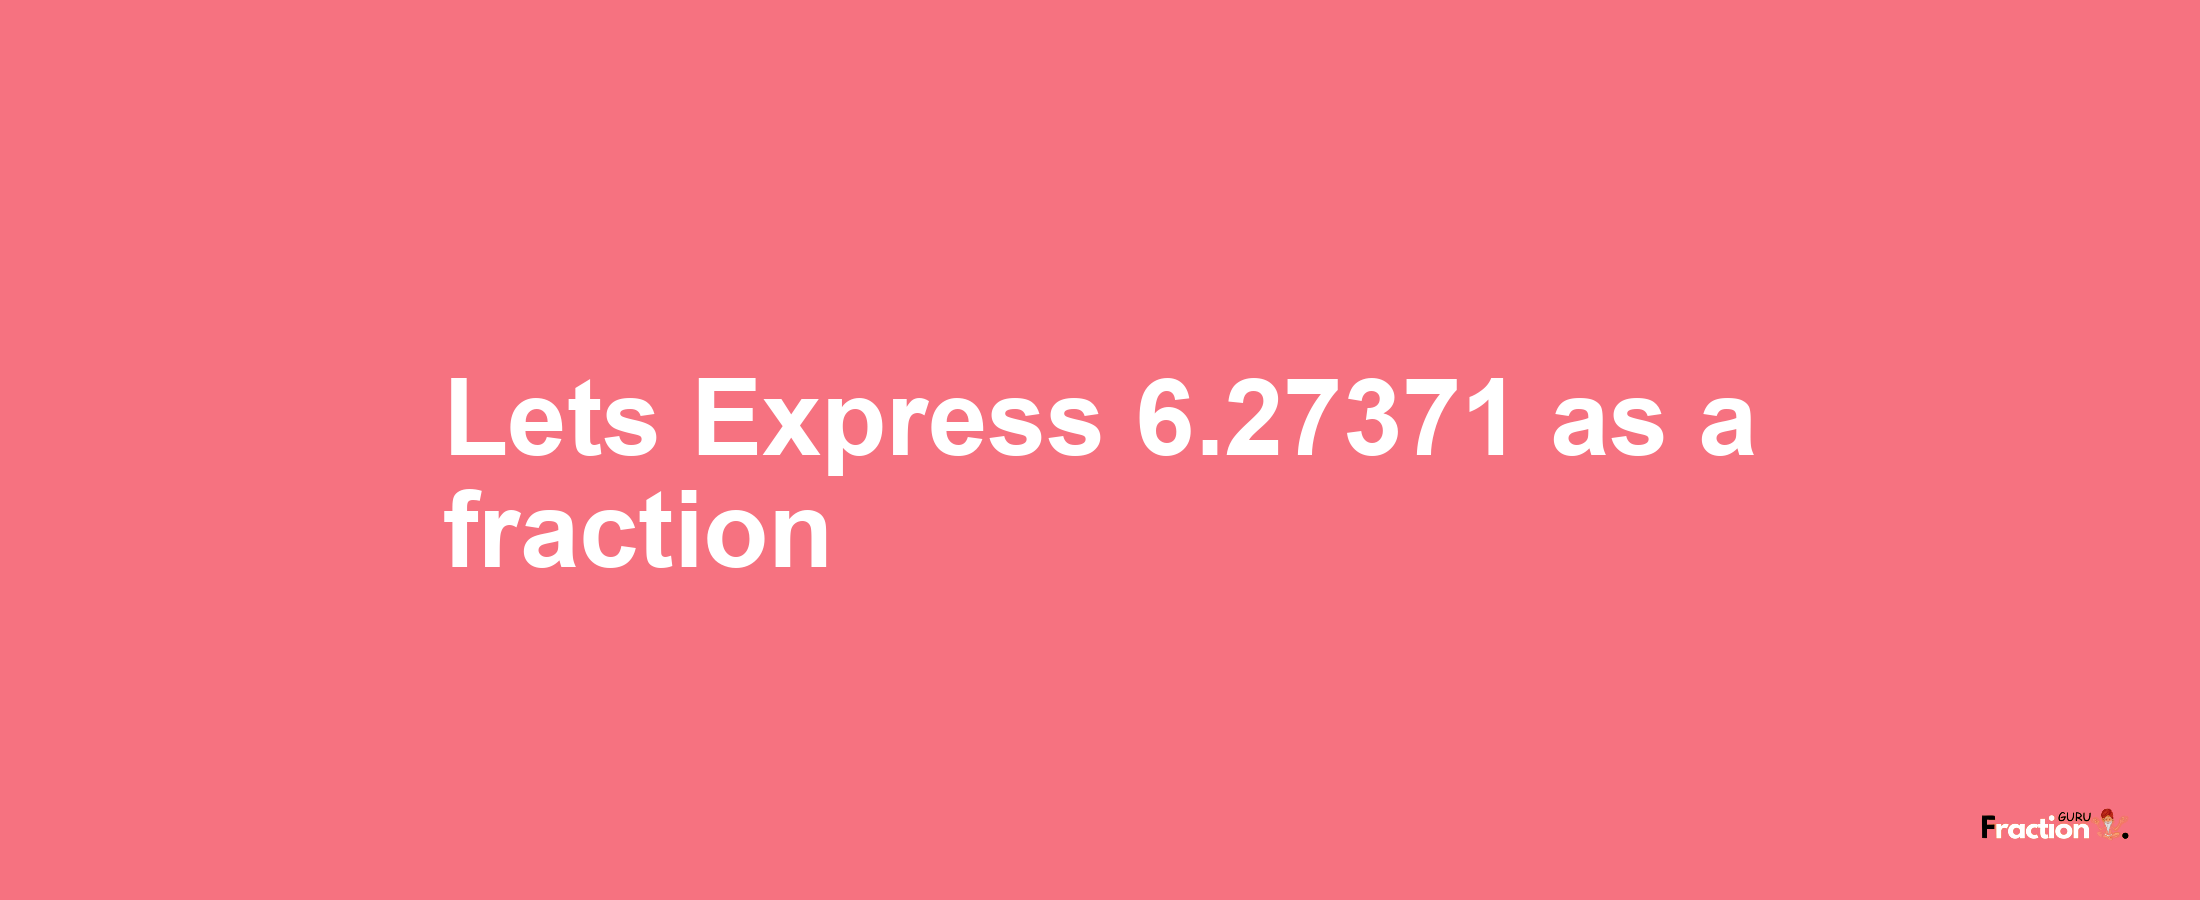 Lets Express 6.27371 as afraction